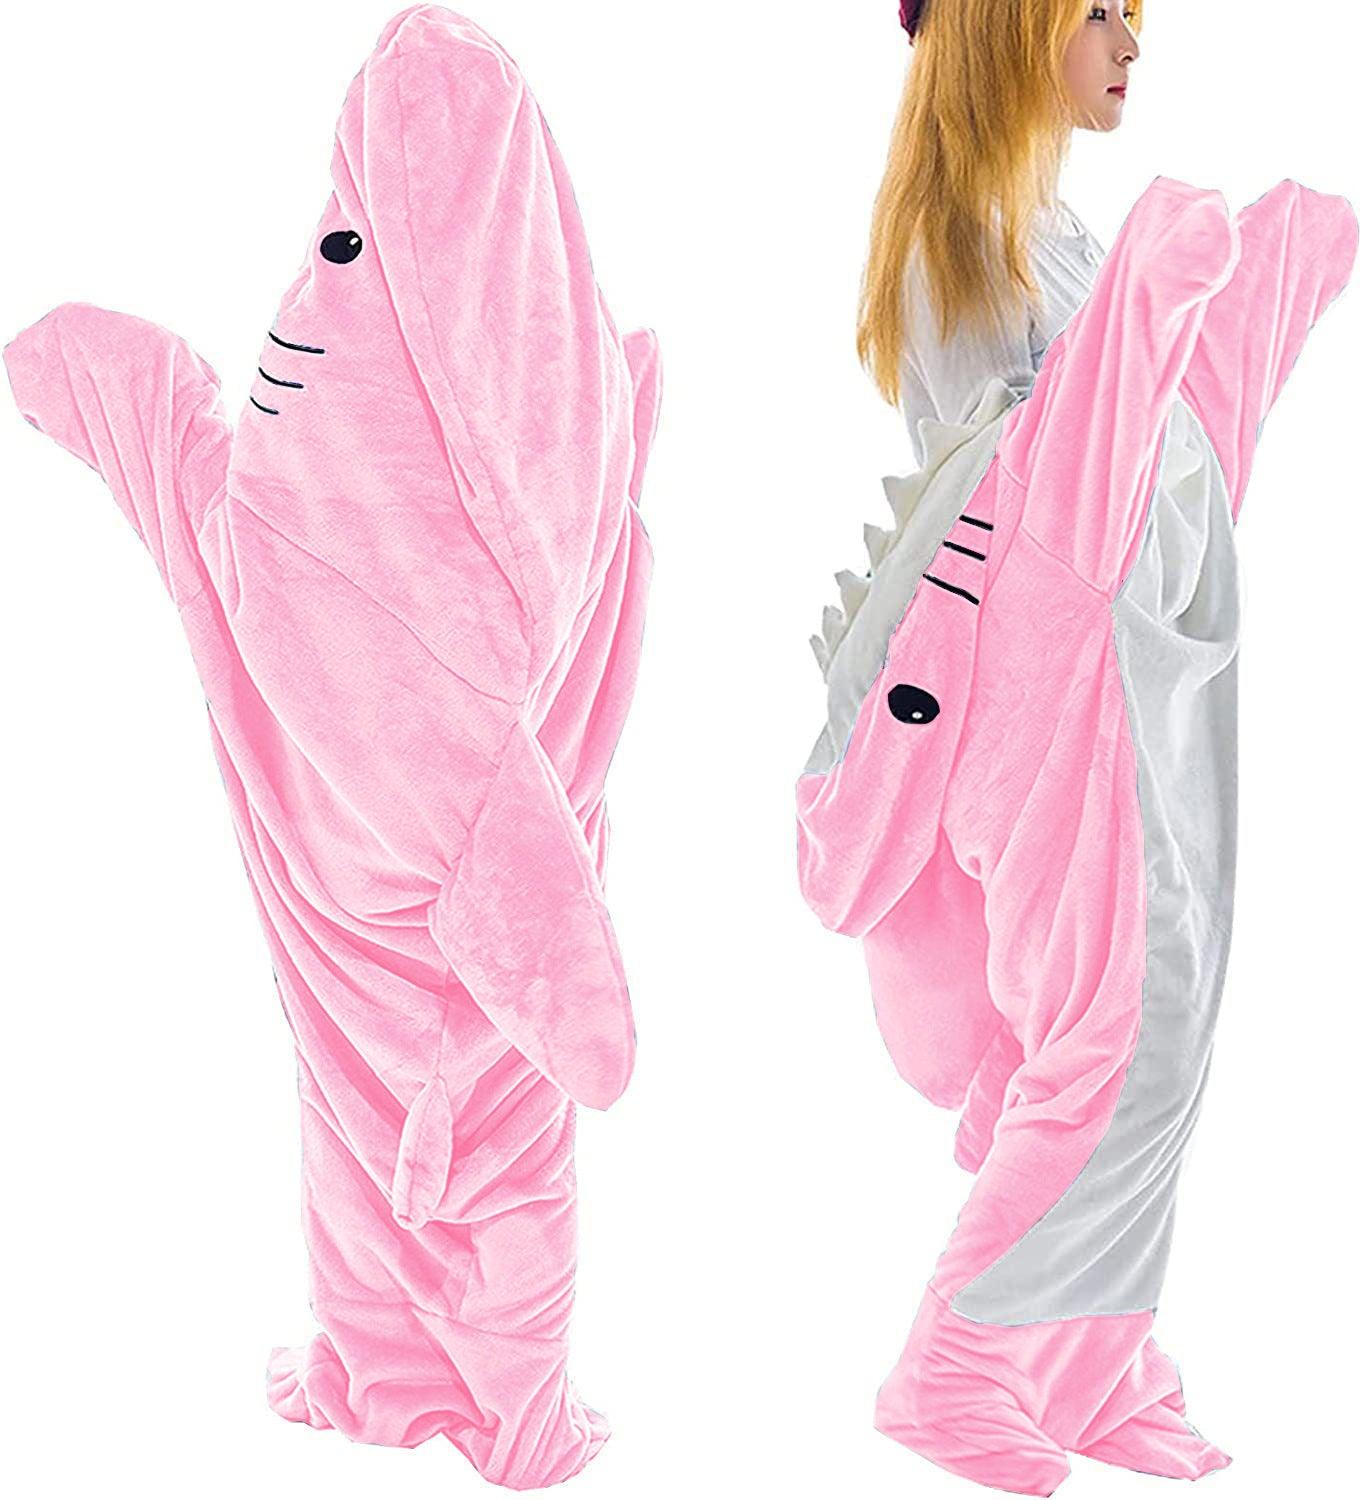 💥New Arrival Plus Size Shark Wearable💥 - Pink / One Size Fits All (Maximum suitable for 5 ft 5 in / 165cm ) - CozyBuys